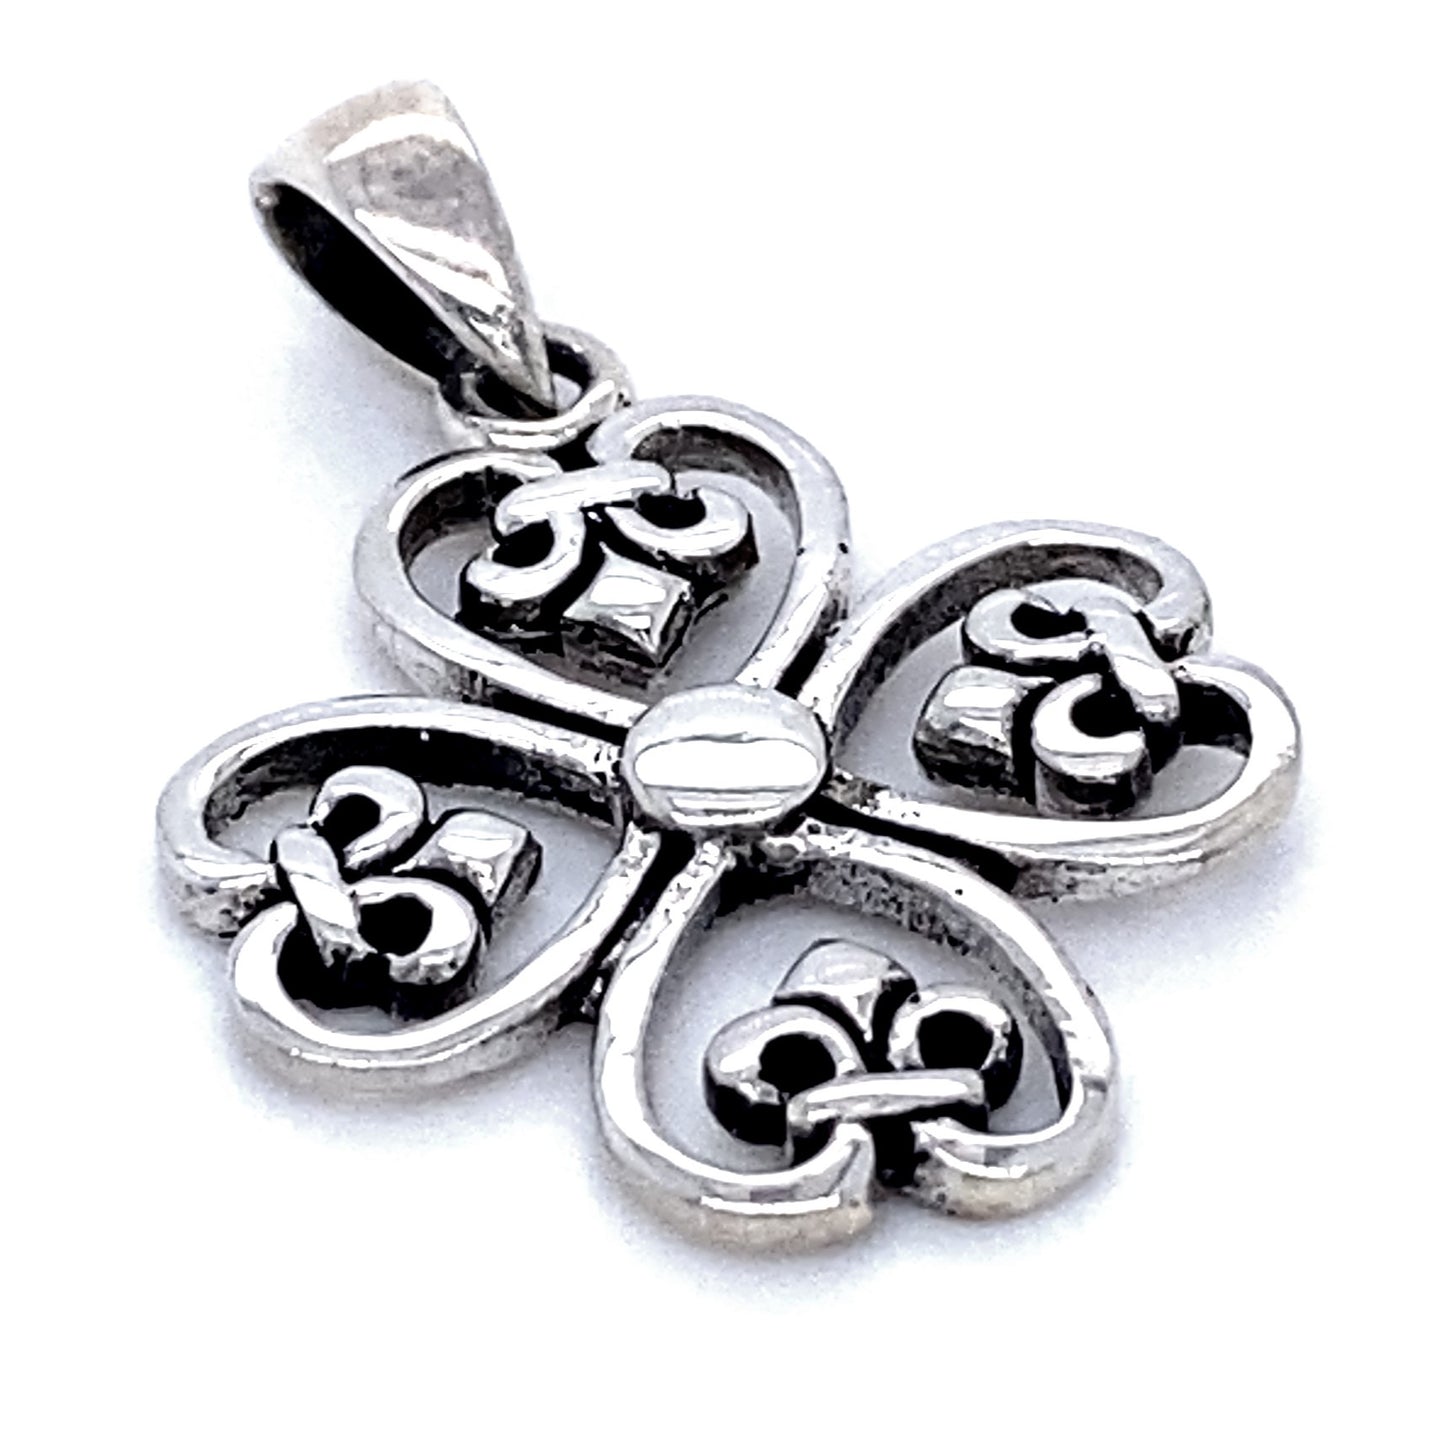 
                  
                    A Clover Cross Pendant with Fleur De Lis in the shape of a clover with intricate heart designs in the petals, exuding a vintage style.
                  
                